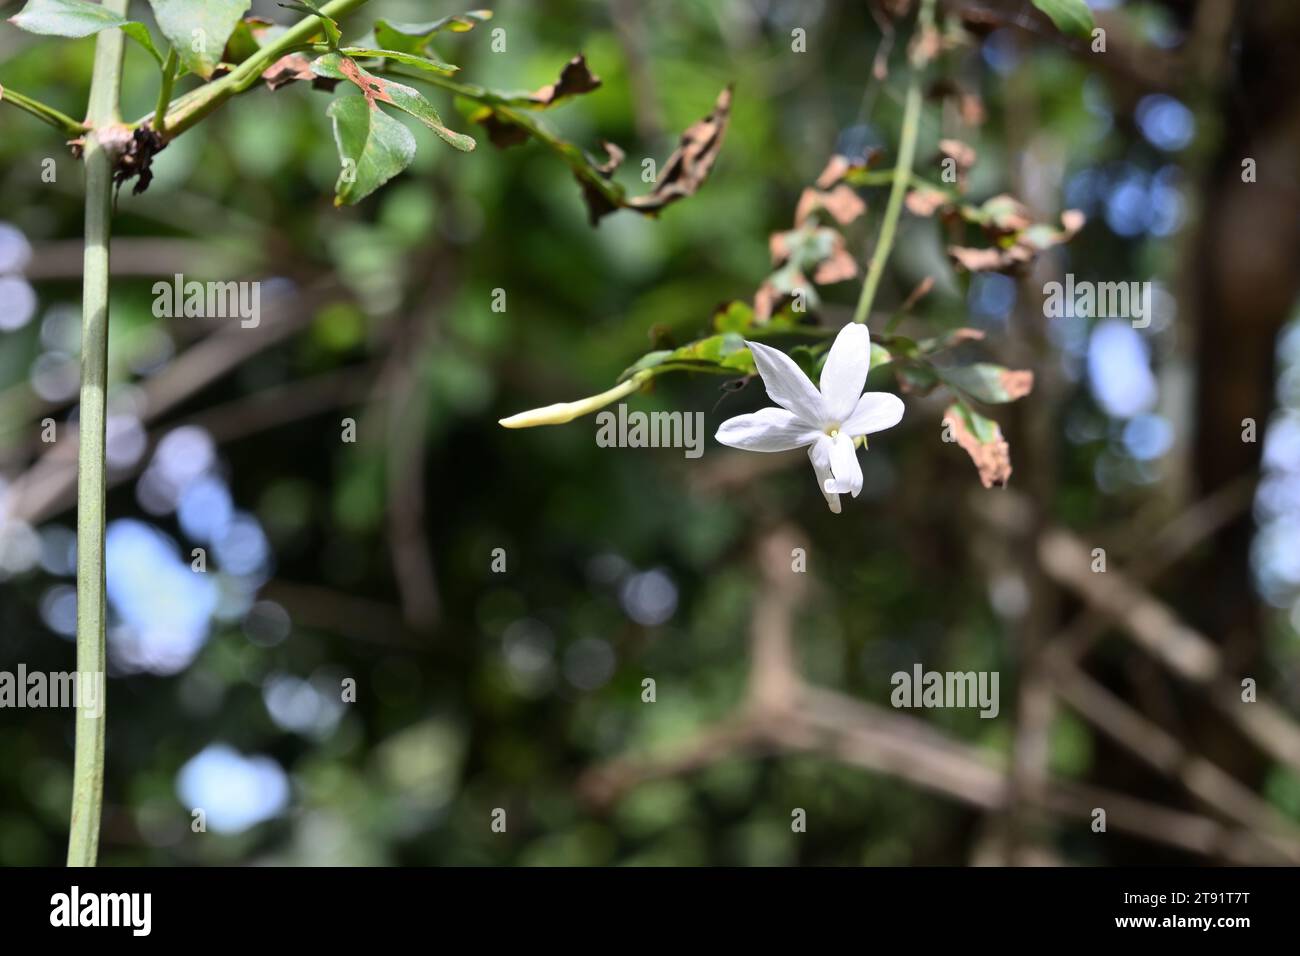 A fragrant white colored Royal jasmine flower (Jasminum grandiflorum) bloomed throughout the night time and now is in direct sunlight. This plant has Stock Photo